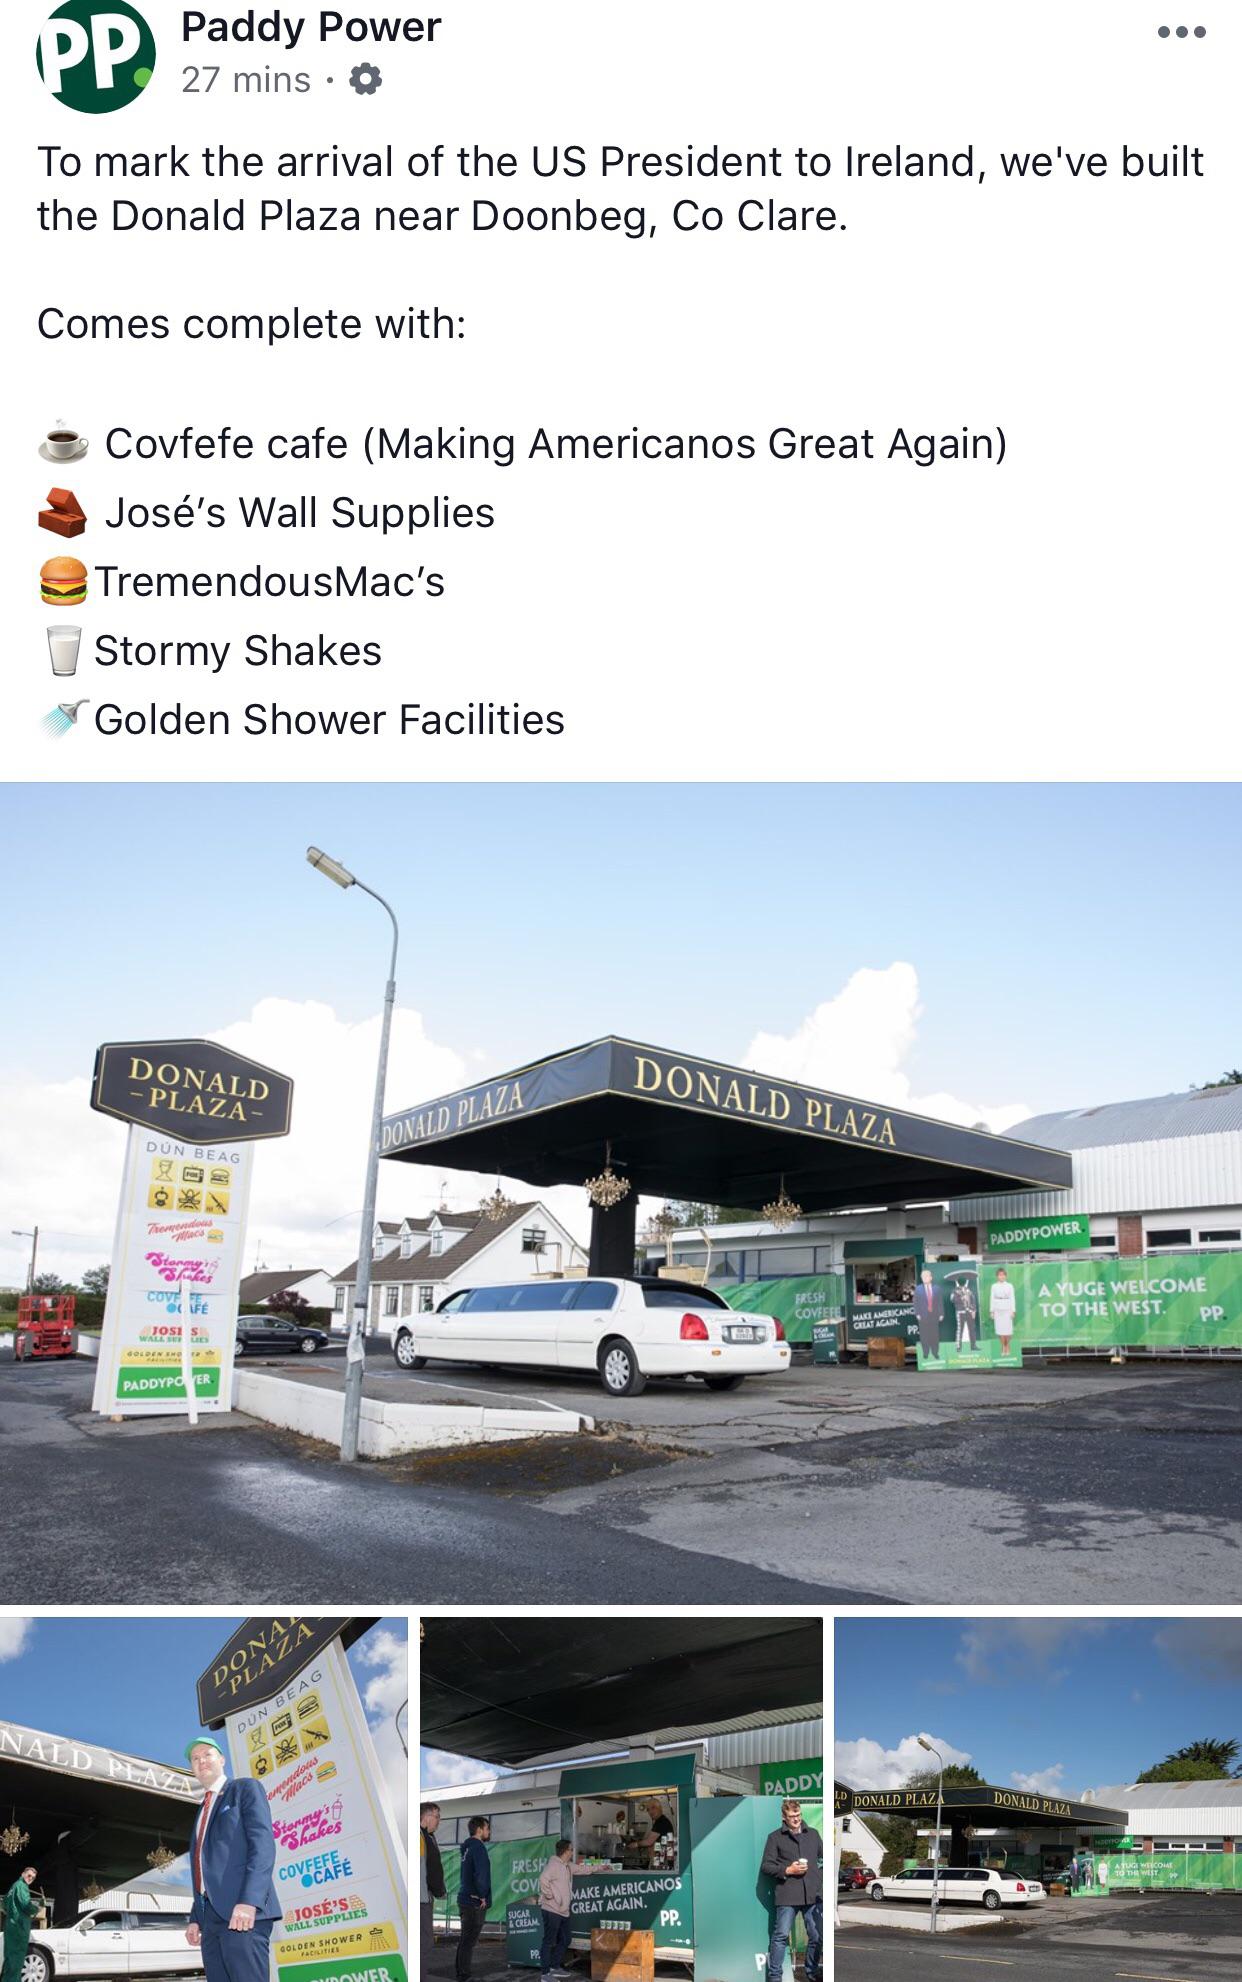 paddy power donald plaza - Paddy Power 27 mins. 0 To mark the arrival of the Us President to Ireland, we've built the Donald Plaza near Doonbeg, Co Clare. Comes complete with e Covfefe cafe Making Americanos Great Again Jos's Wall Supplies Tremendous Mac'